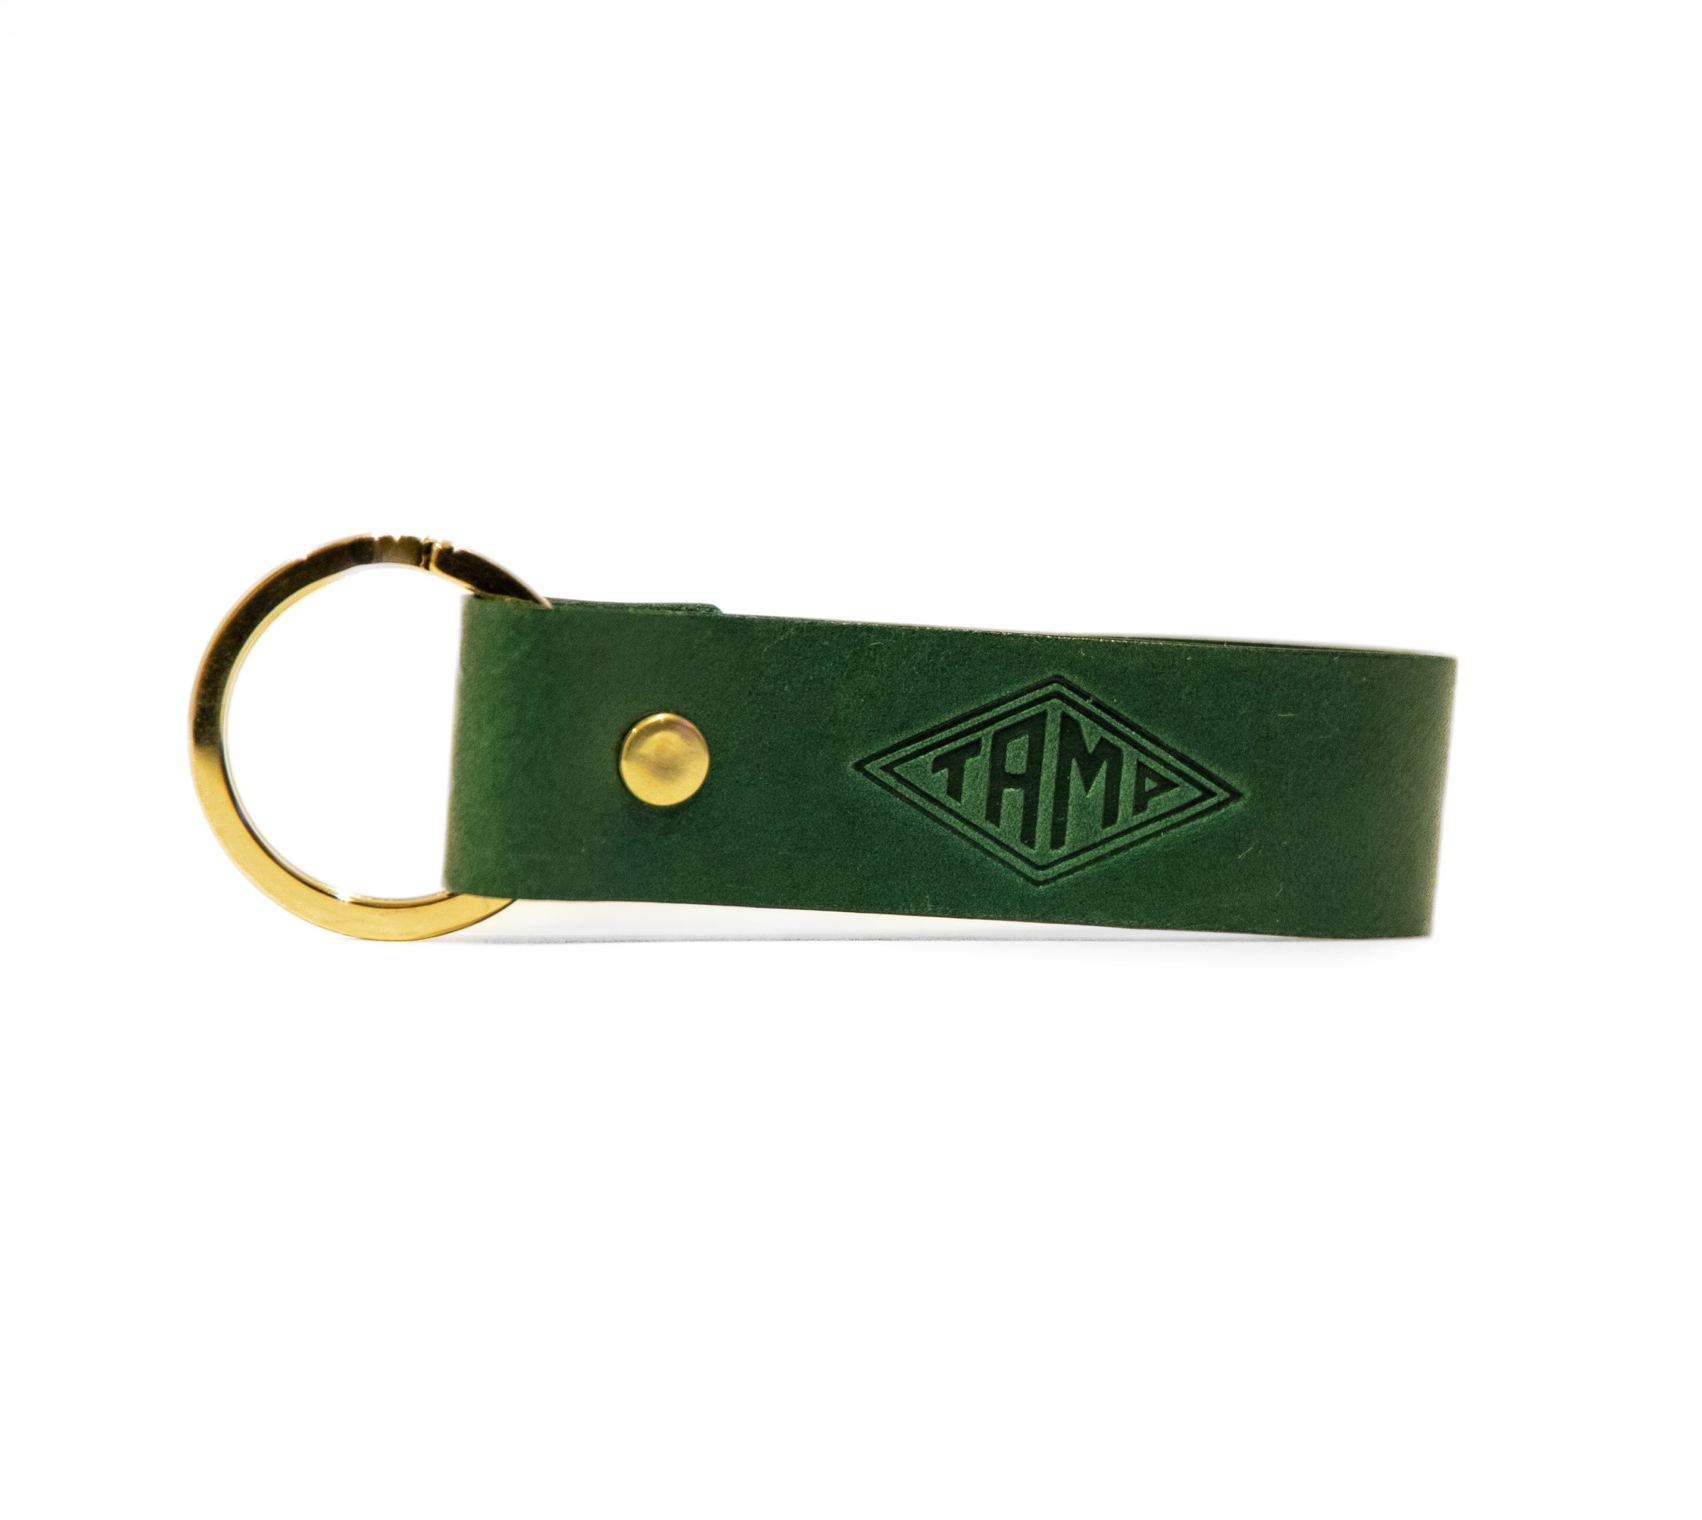 front view of a handcrafted green leather keyring from Tamp Coffee, featuring intricate stitching and embossed logo detail